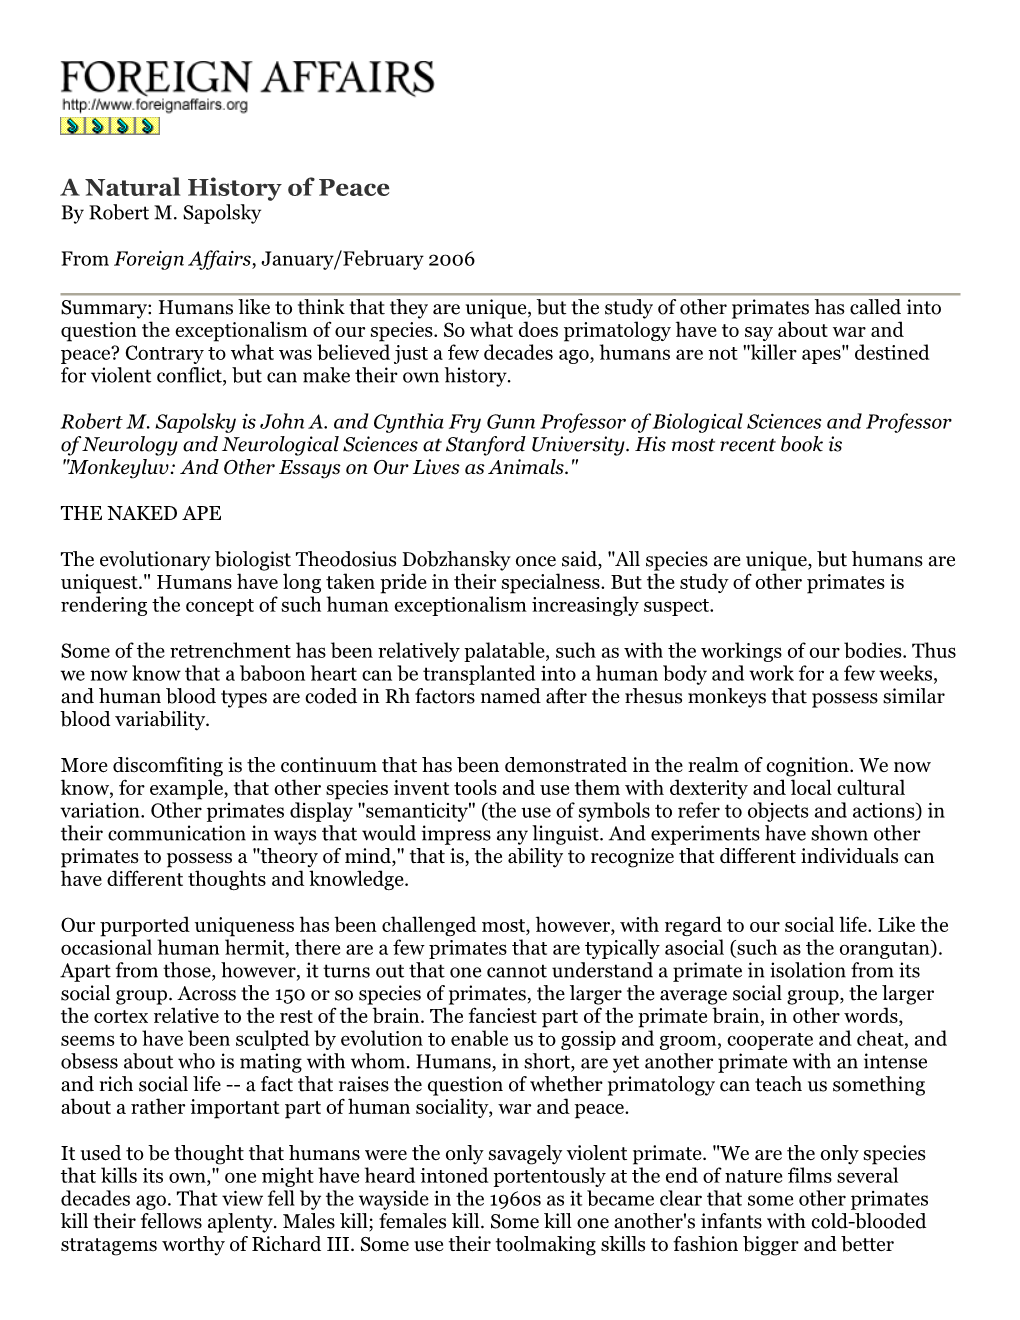 A Natural History of Peace by Robert M. Sapolsky